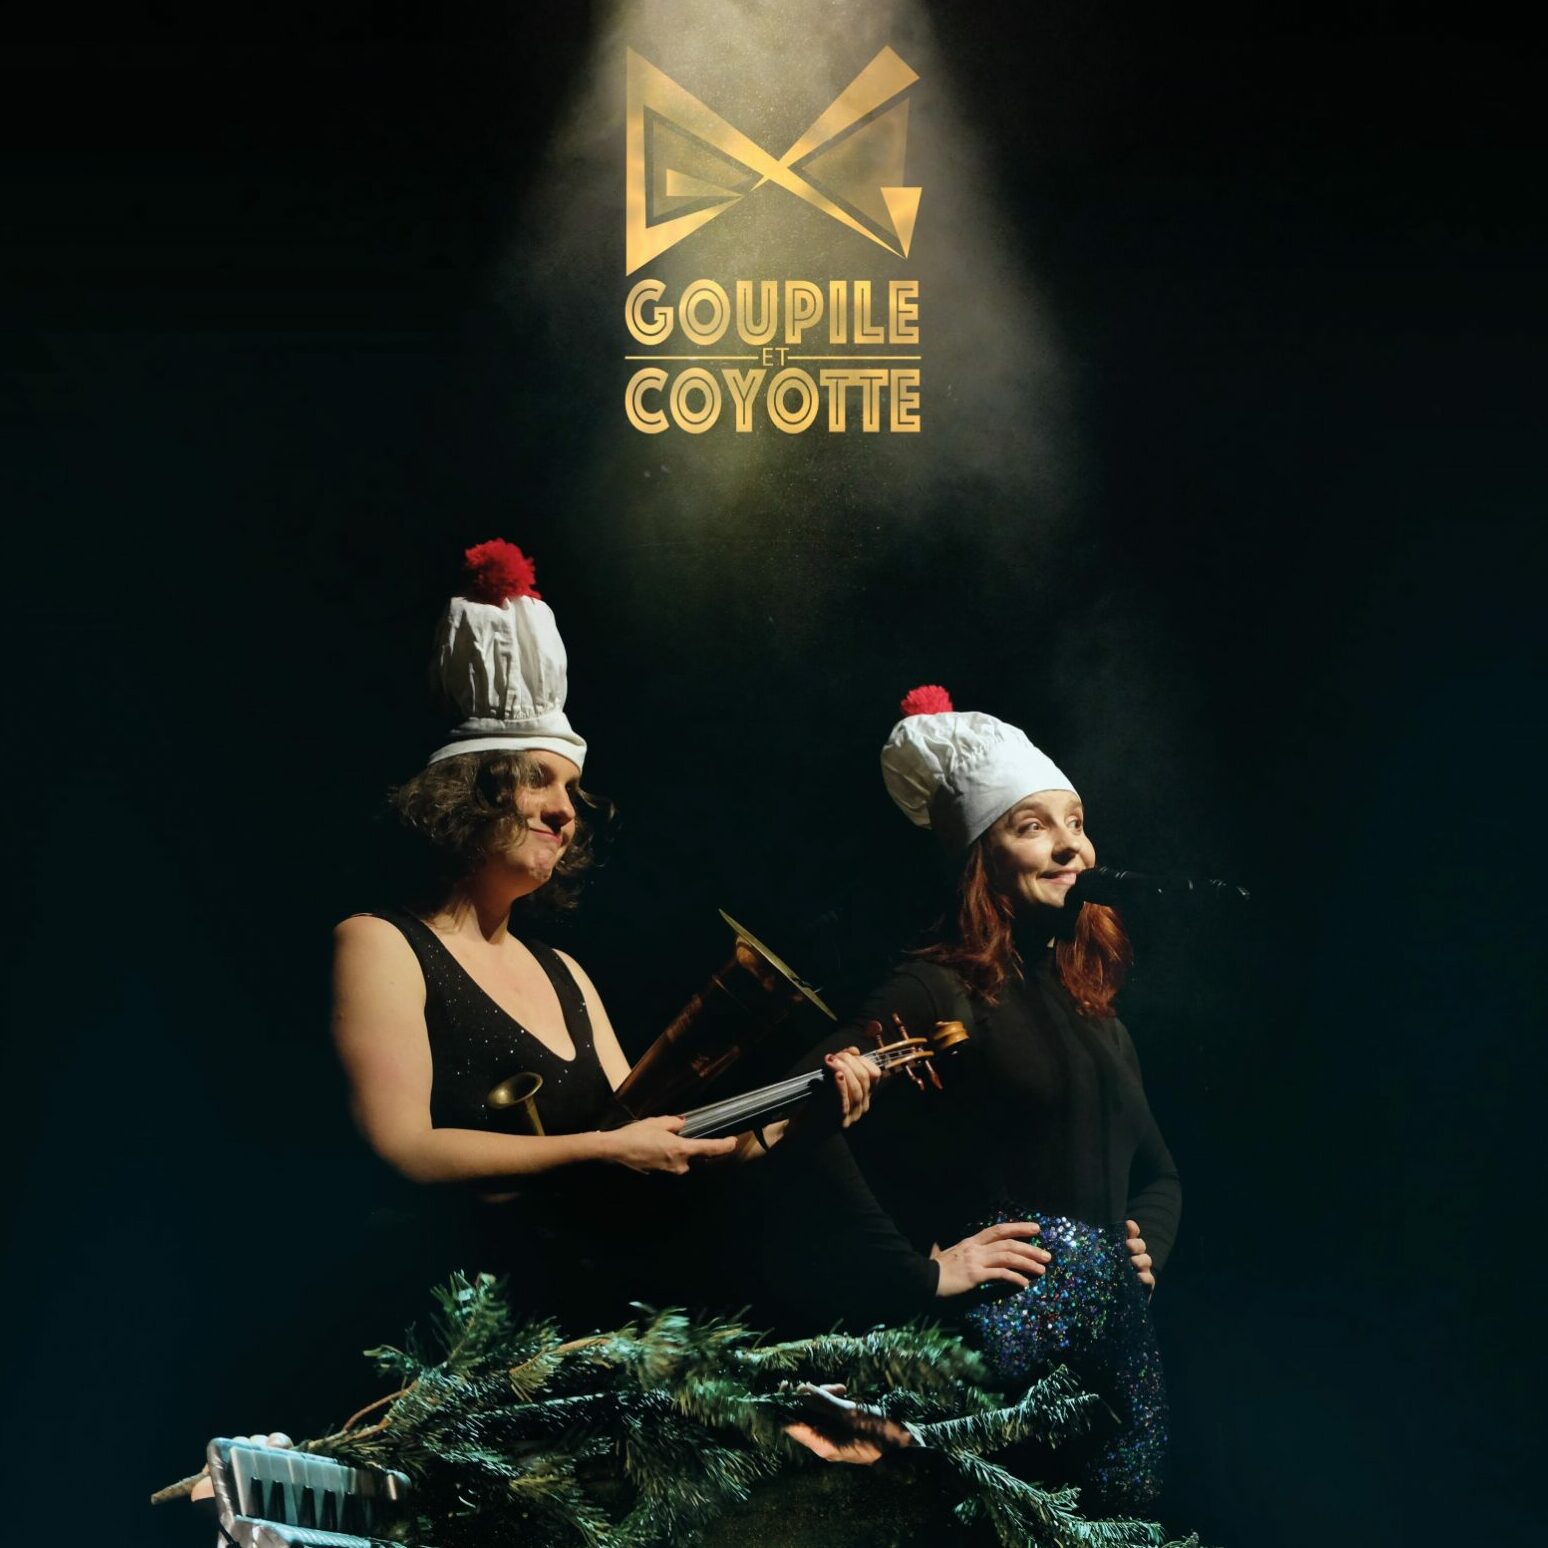 Goupile et Coyote